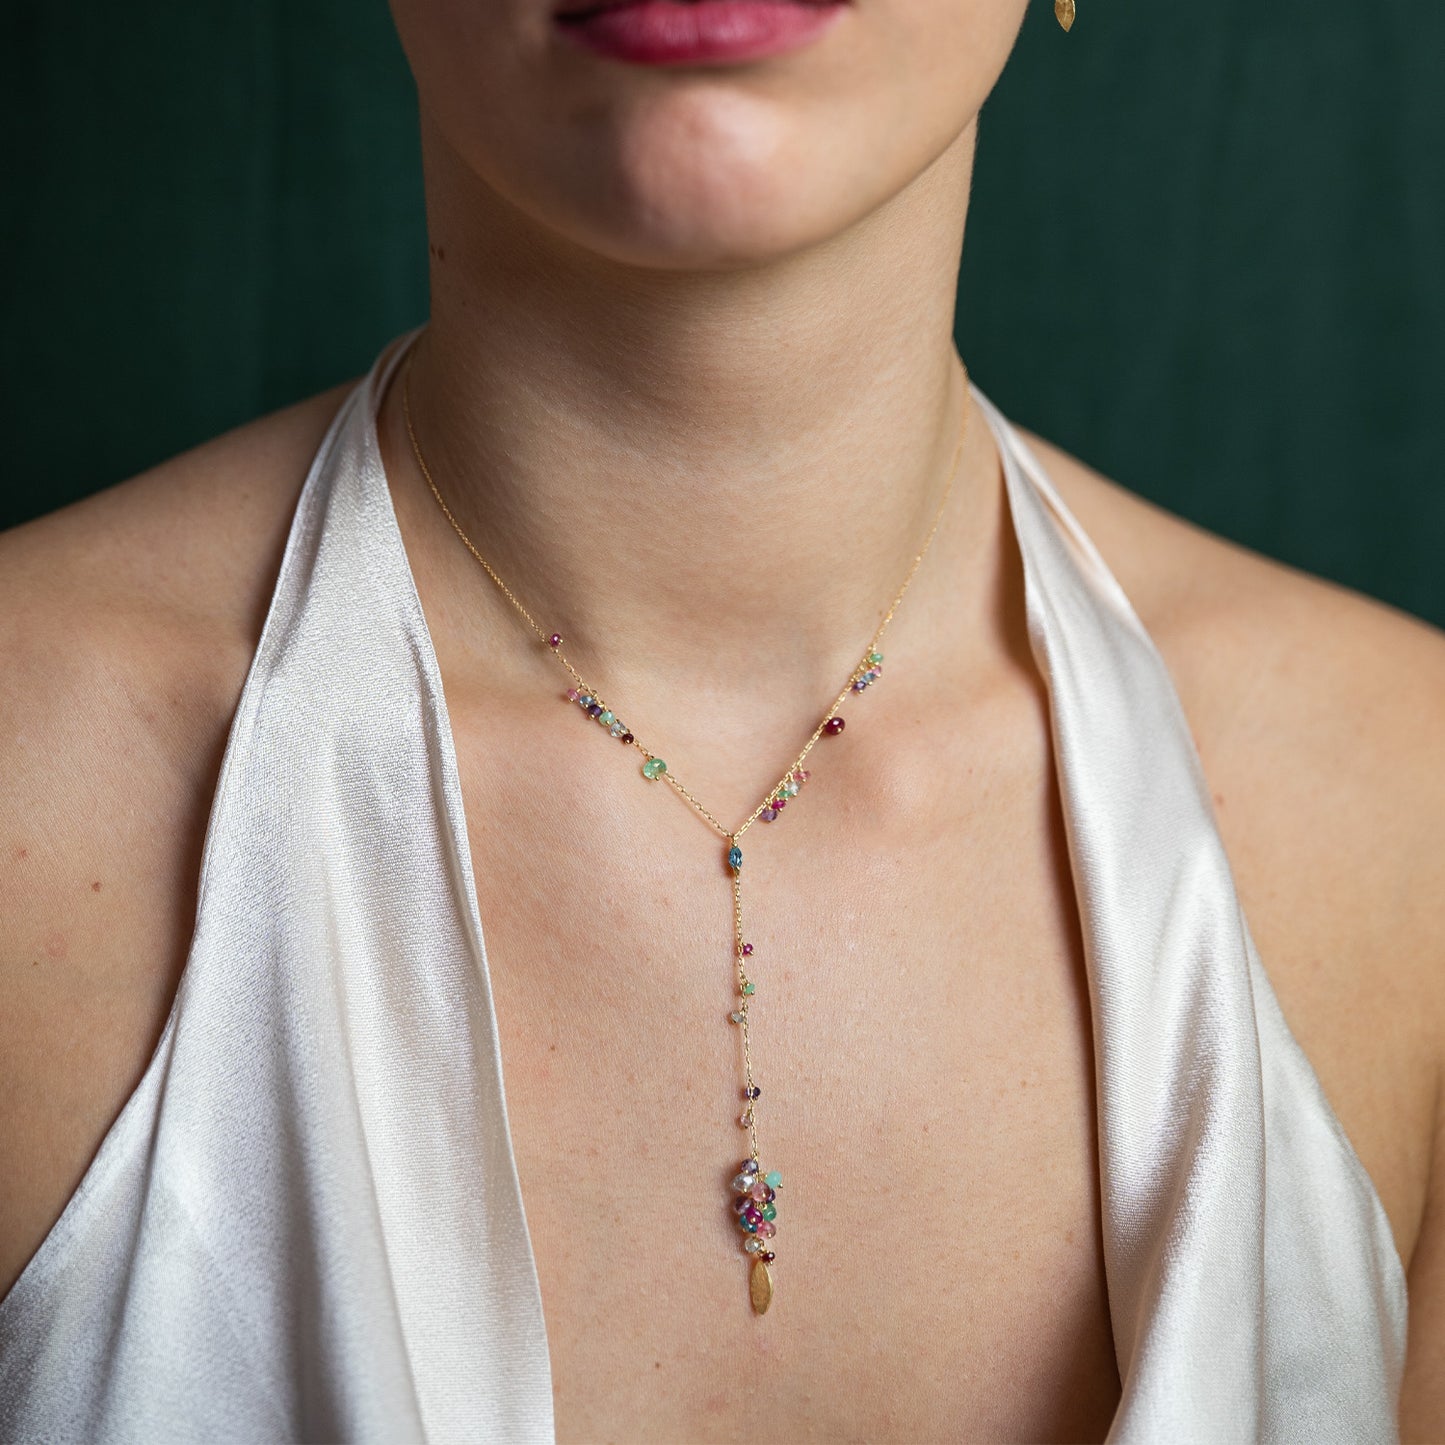 romantic world y shaped blue topaz necklace on model